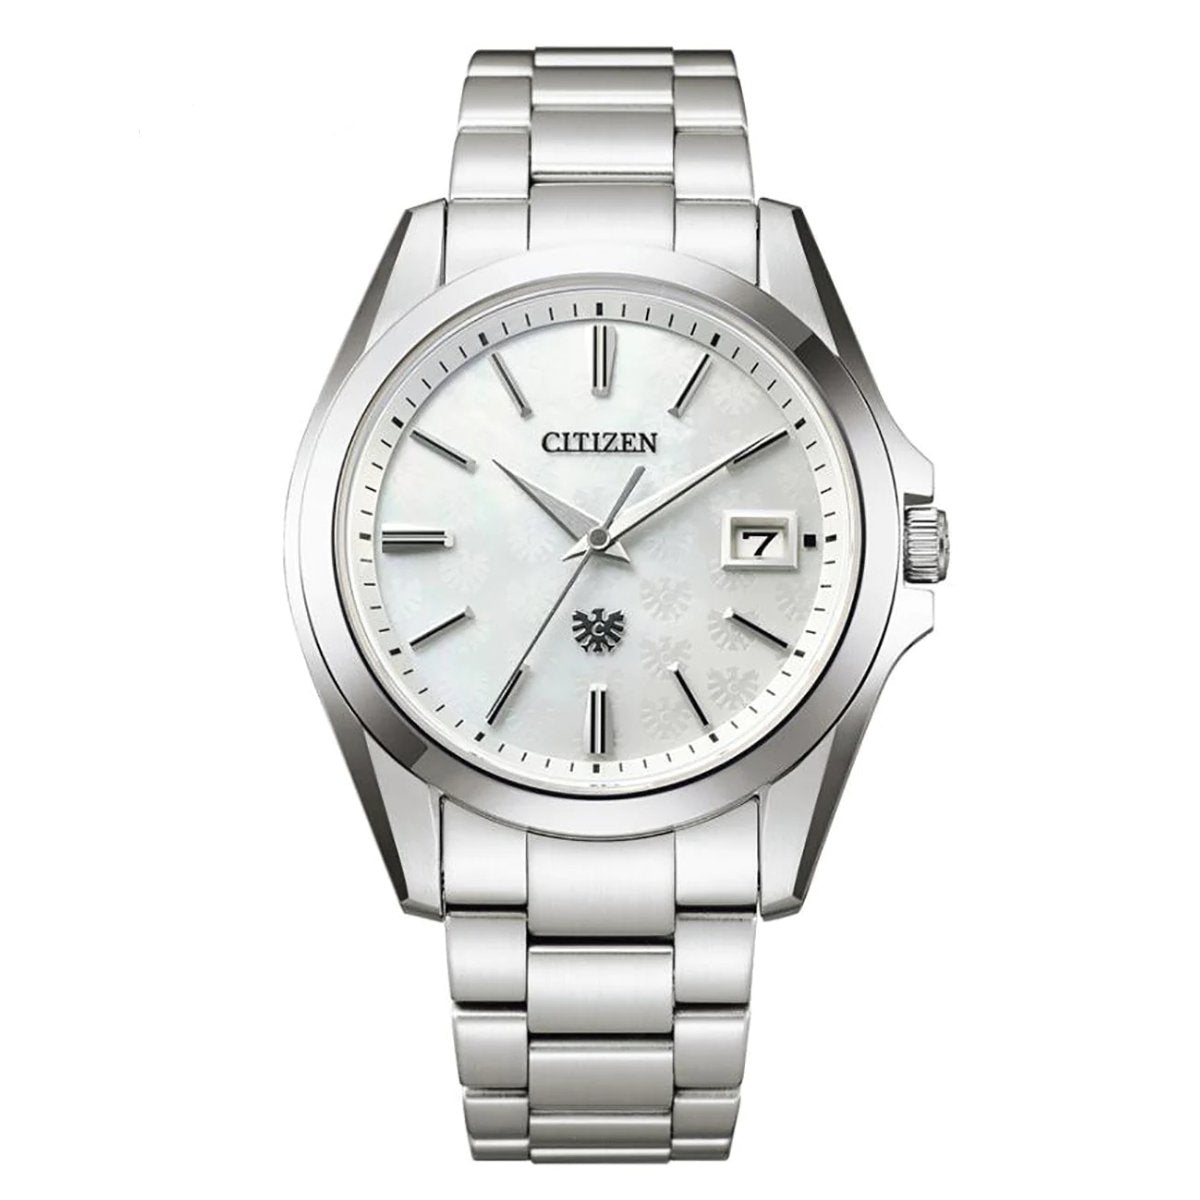 Citizen AQ4060-50W The Citizen Made in Japan Limited Edition Watch (PRE-ORDER) -Citizen